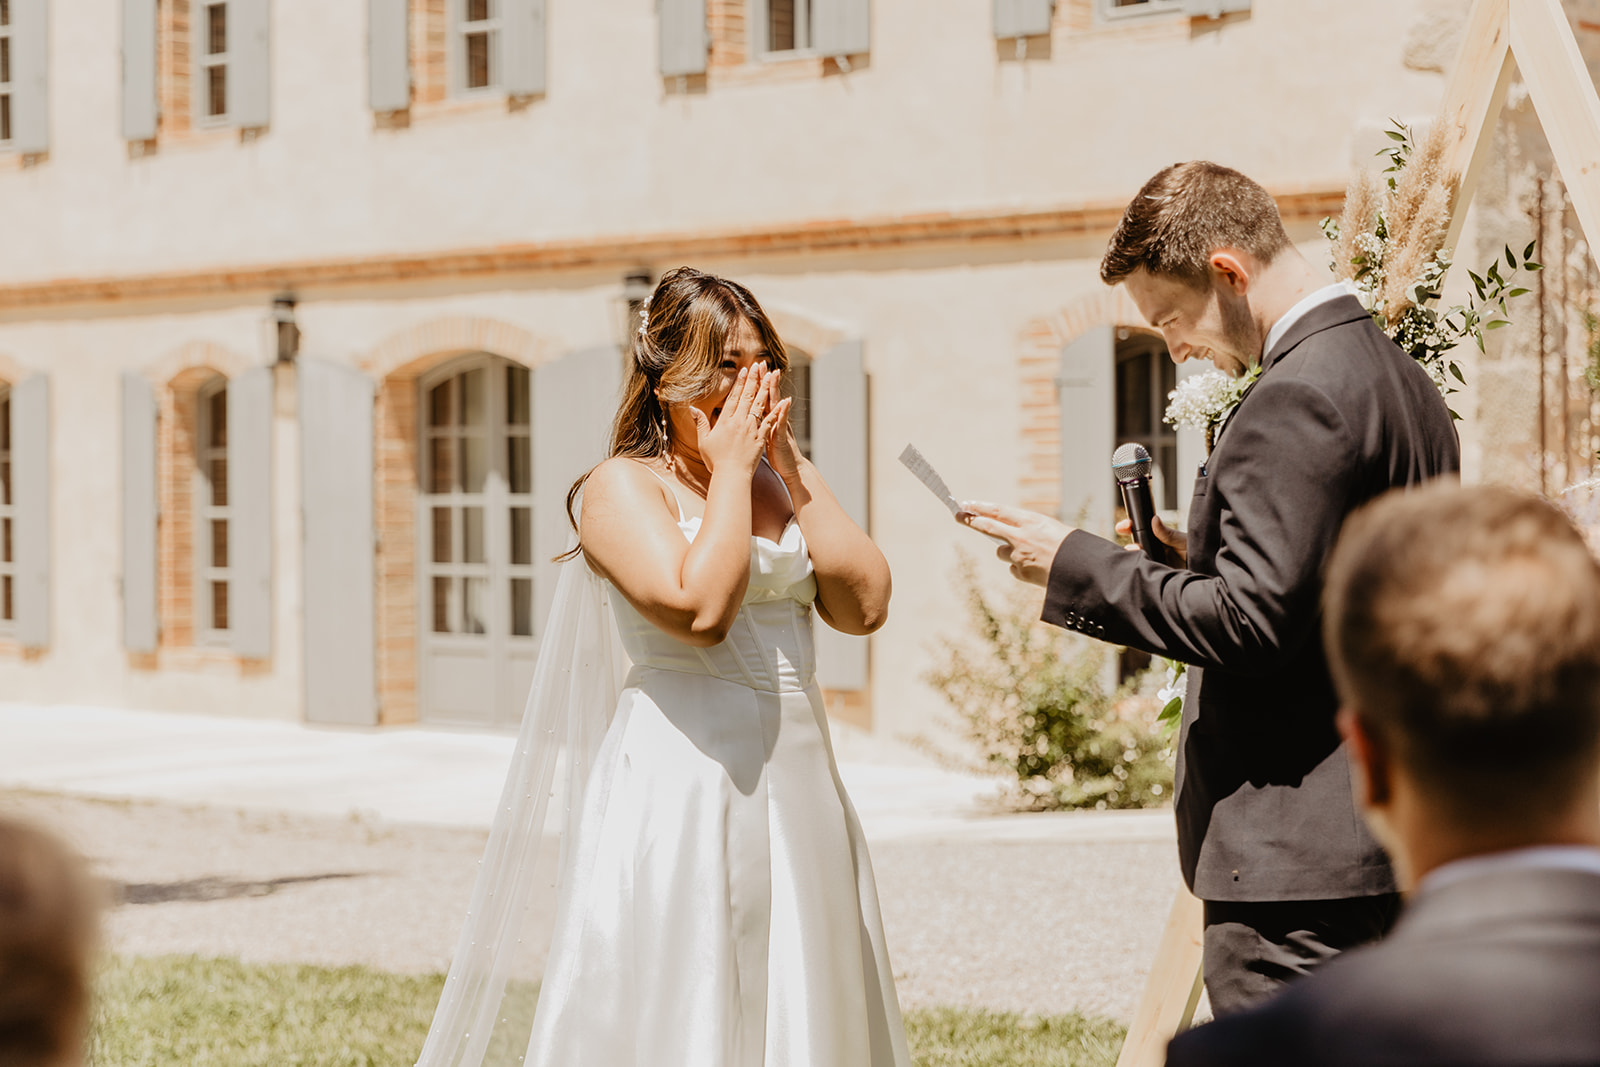 Bride crying with Groom at a Destination Wedding in France. Photography & Videography by OliveJoy Photography